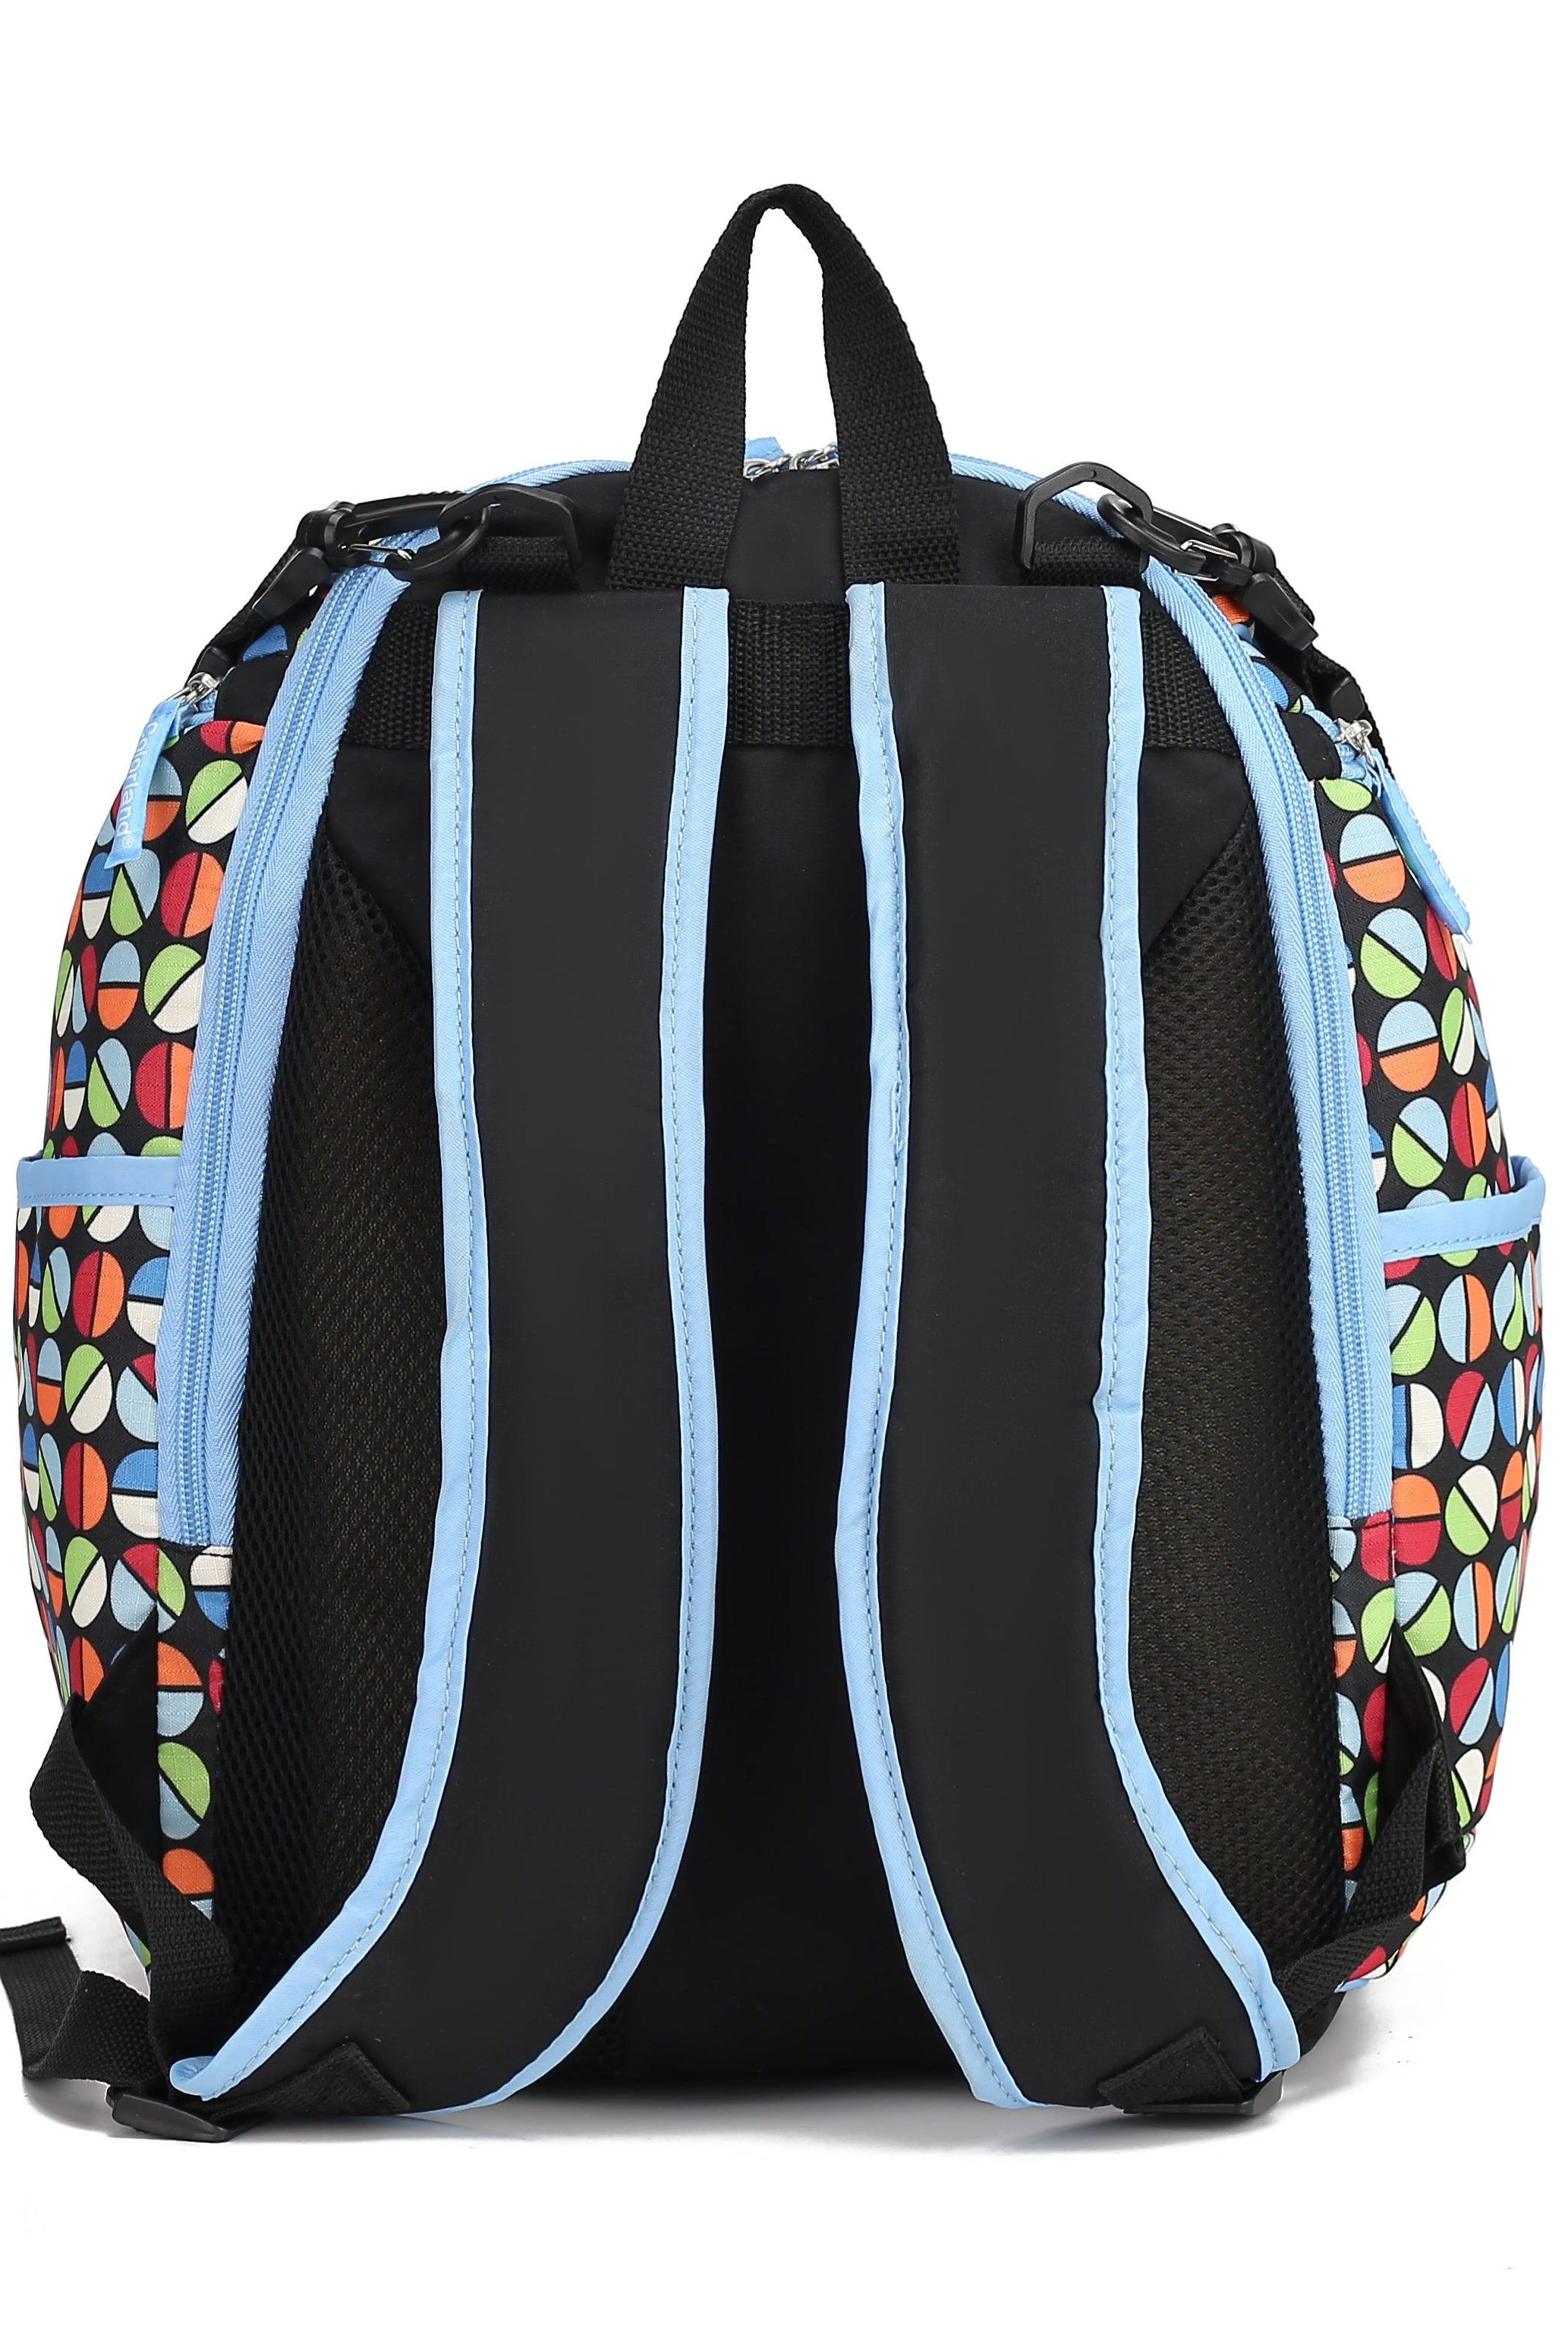 Luggage & Bags - Backpacks Colorland Large Backpack With Multi-Pockets